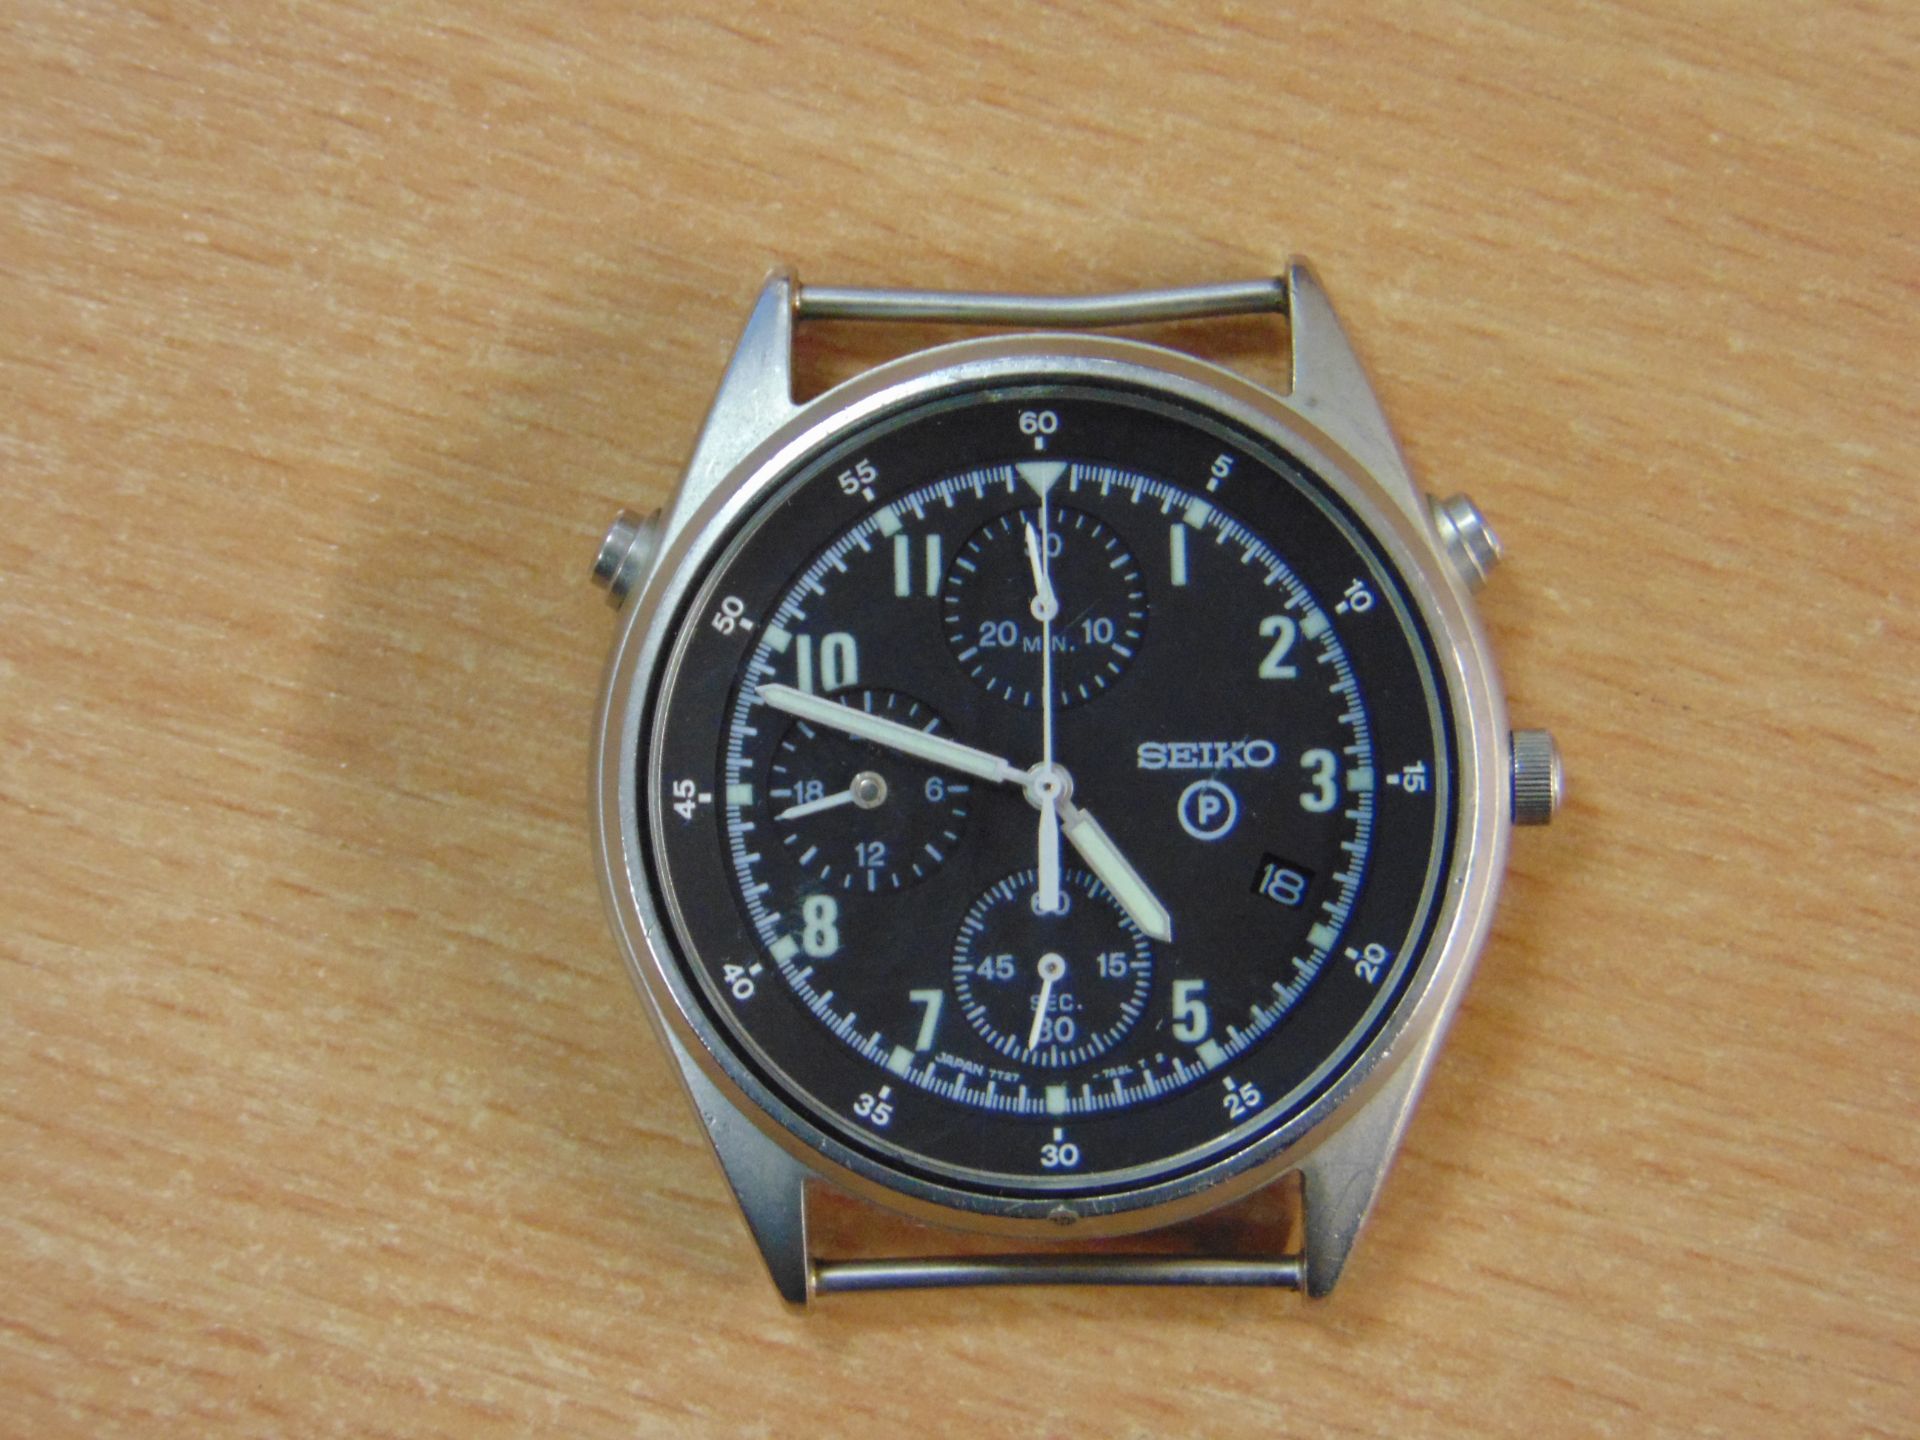 SEIKO GEN 2 RAF ISSUE PILOTS CHRONO NATO MARKED DATED 1993 - Image 4 of 9